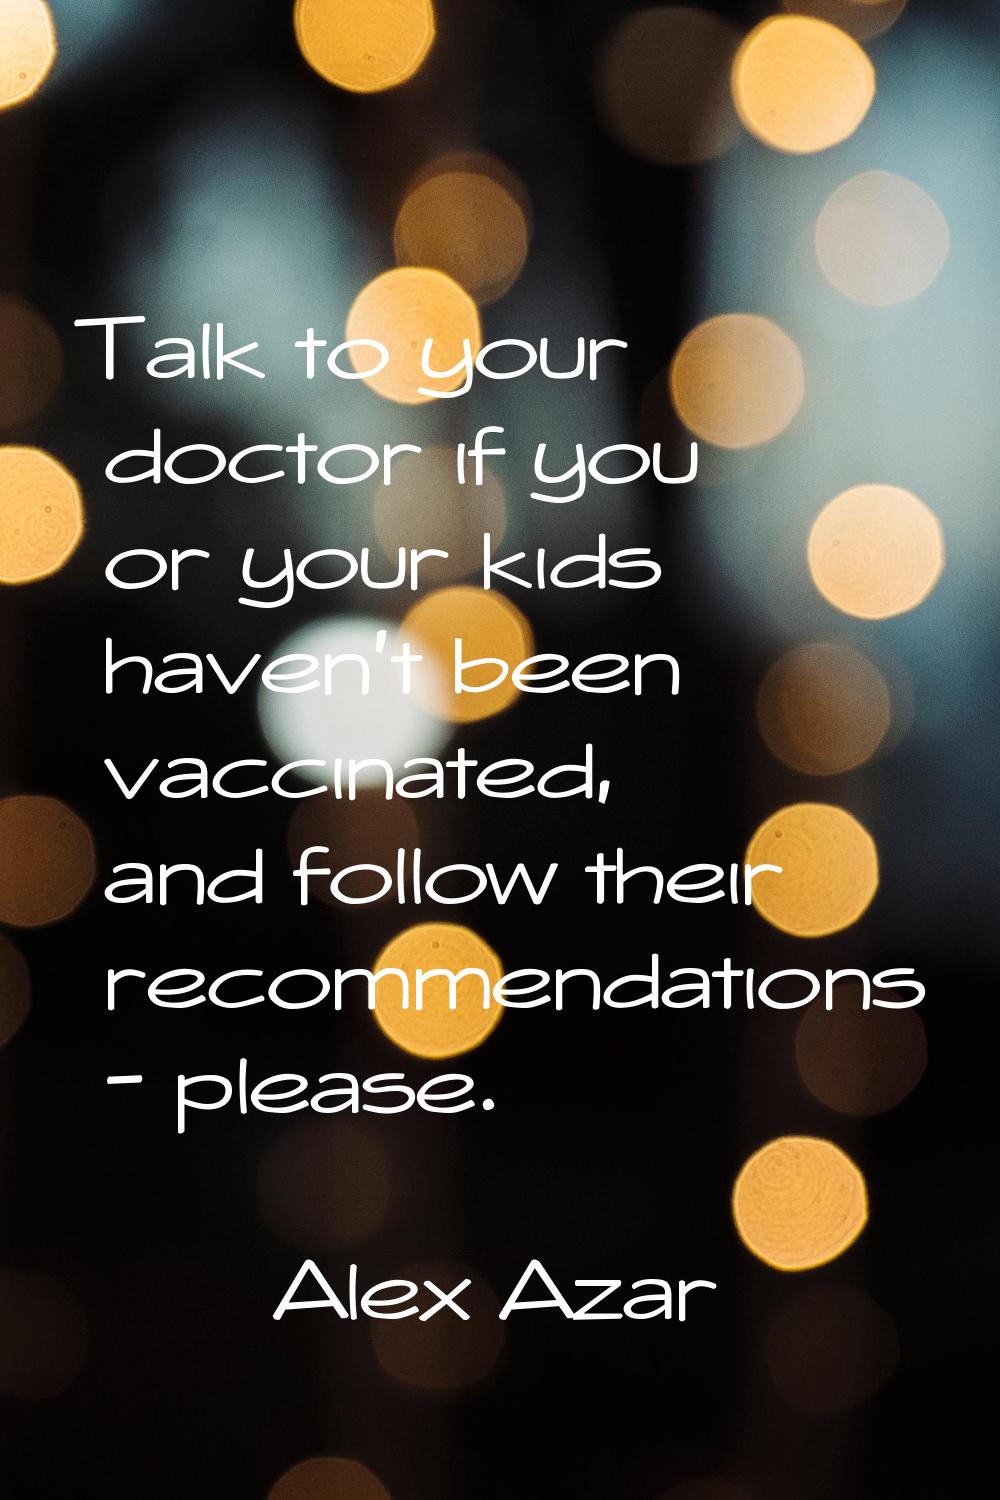 Talk to your doctor if you or your kids haven't been vaccinated, and follow their recommendations -